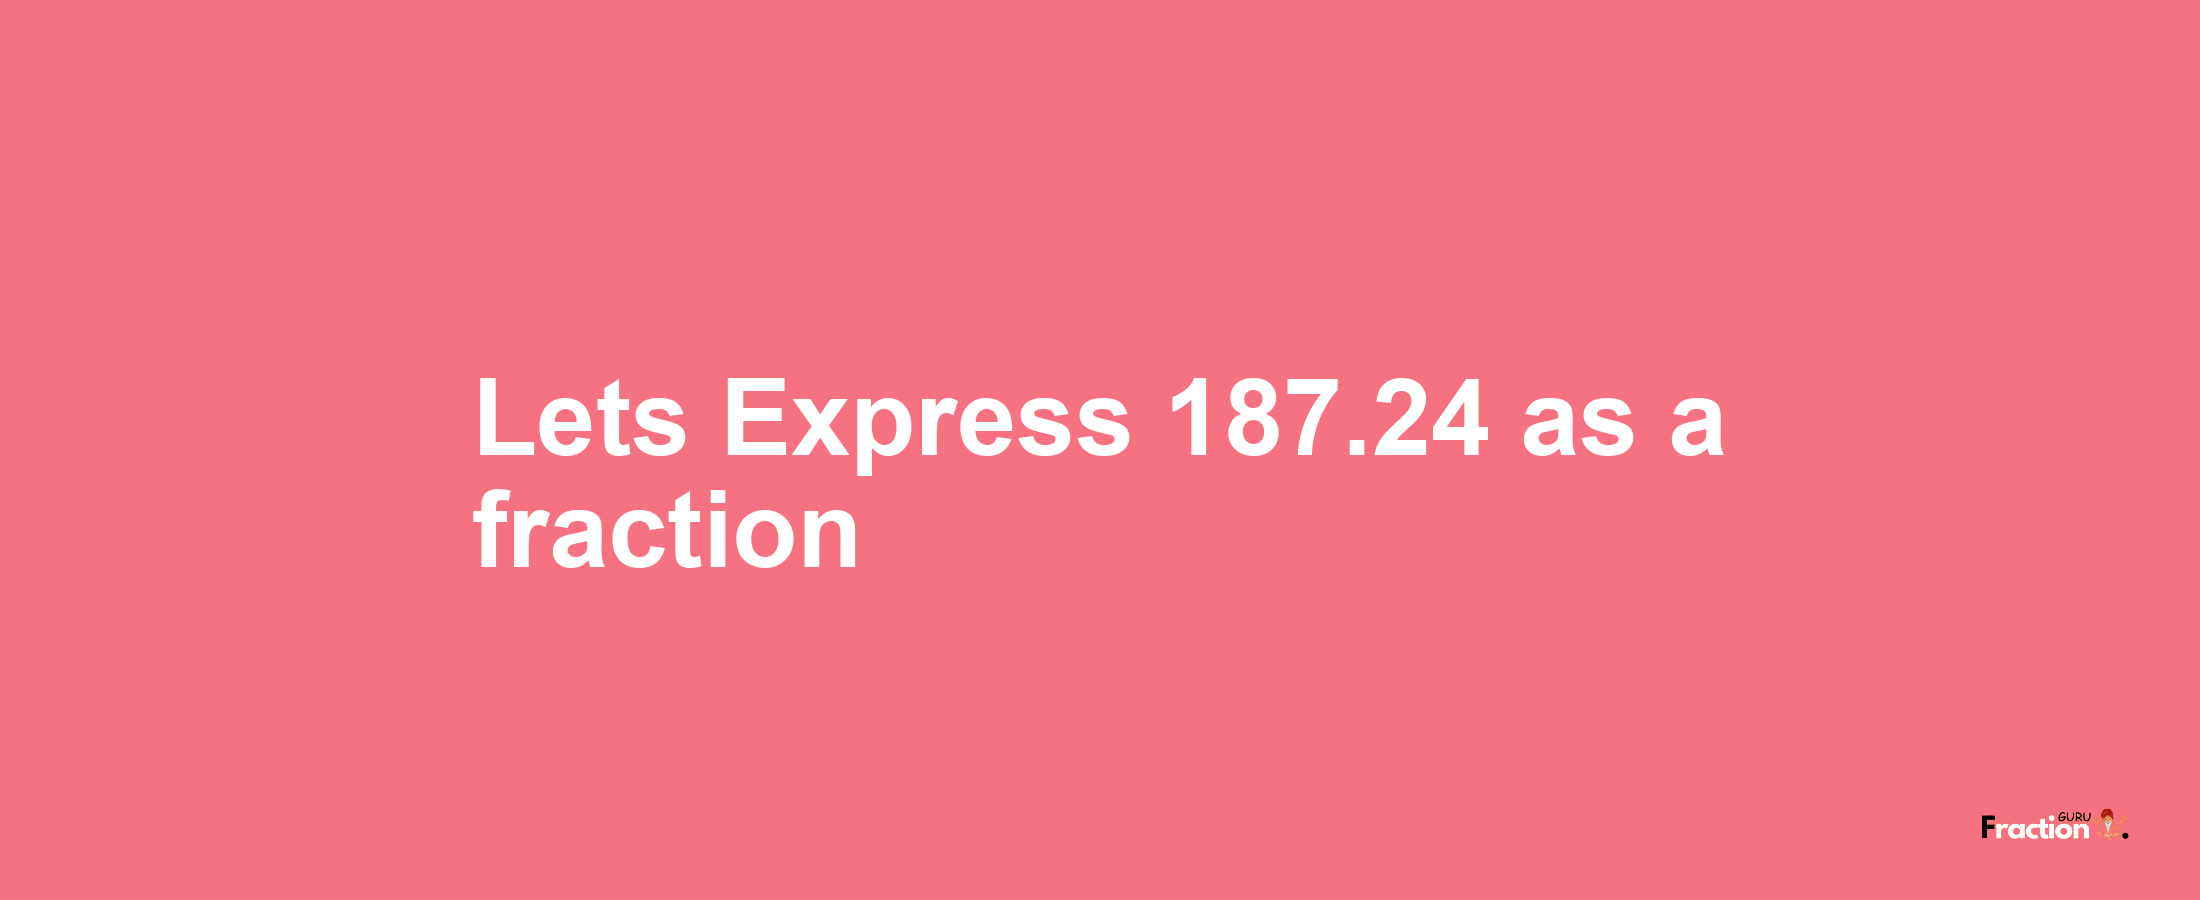 Lets Express 187.24 as afraction